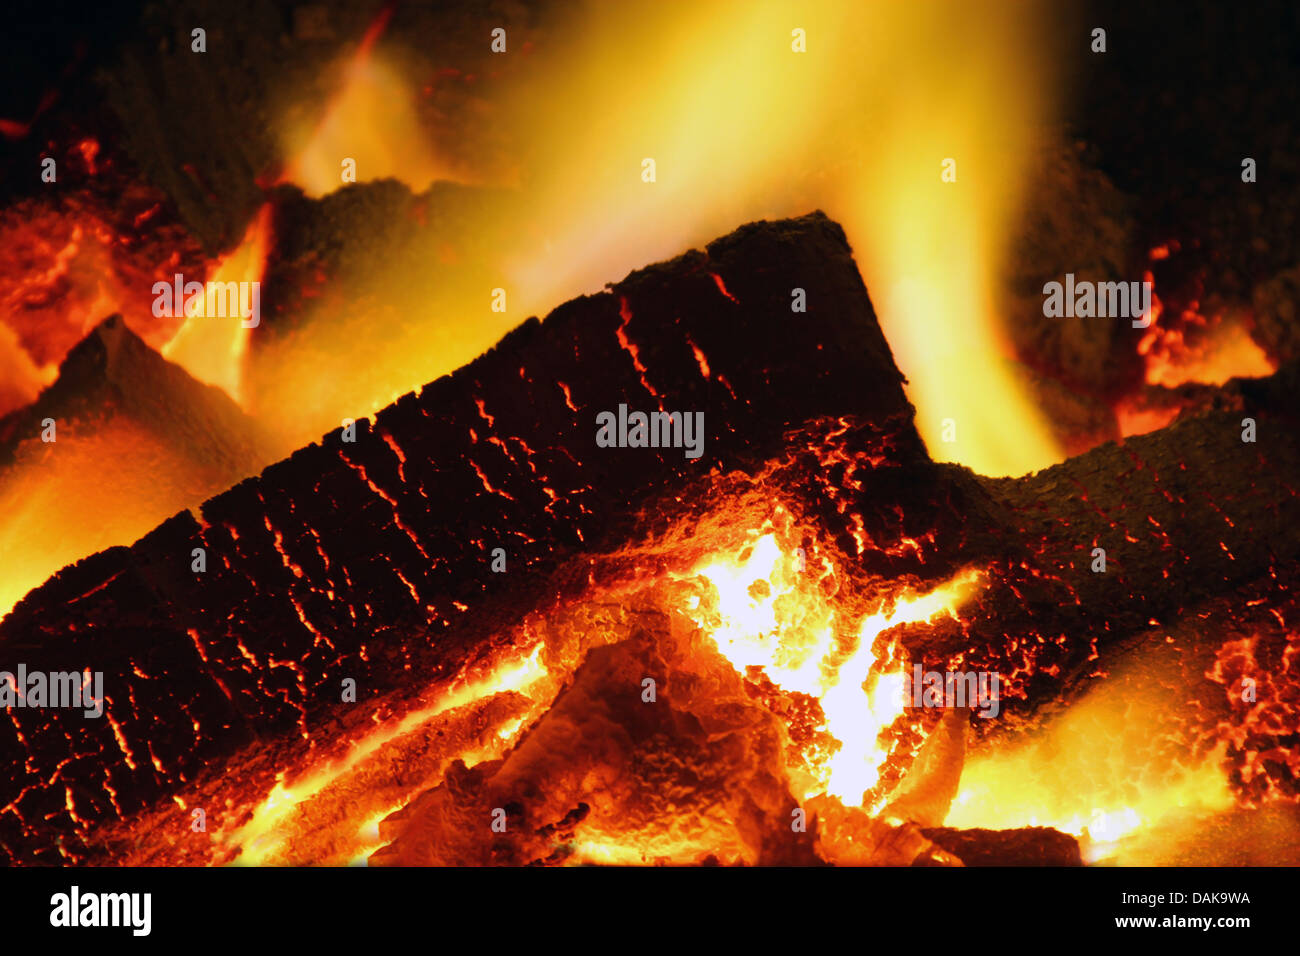 burning lignite briquettes in an oven Stock Photo